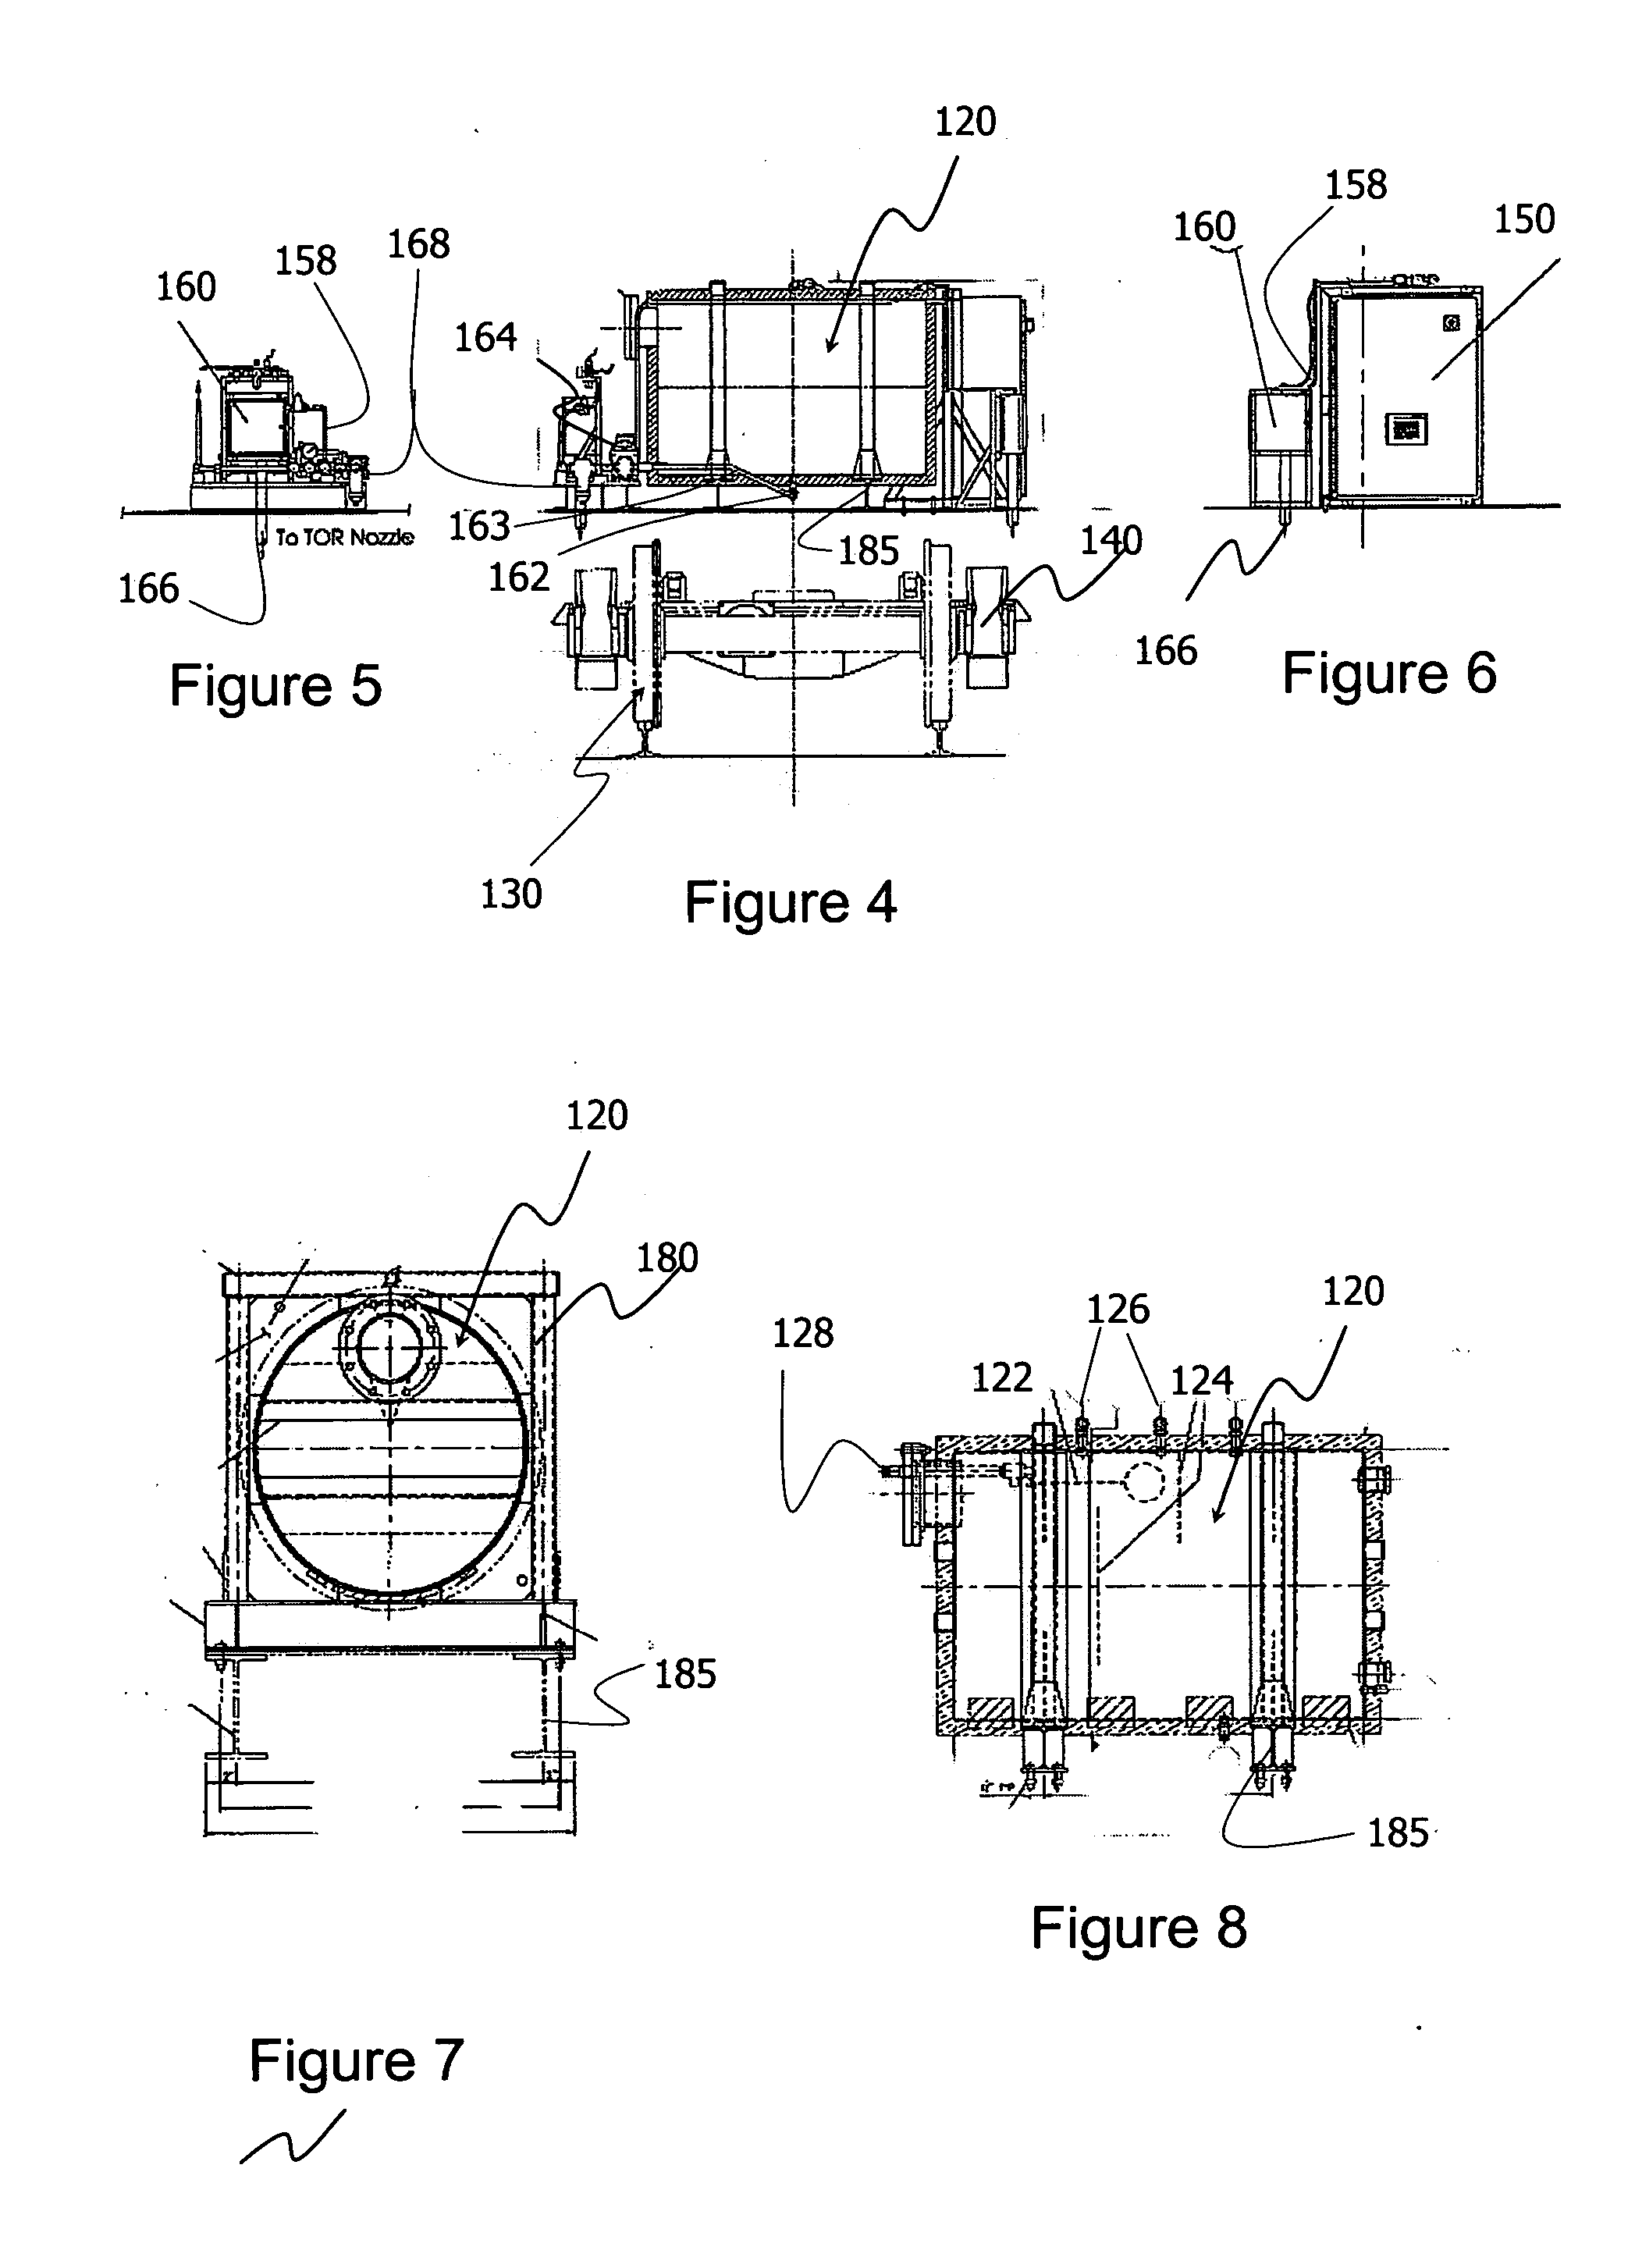 Method and apparatus for applying liquid compositions in rail systems